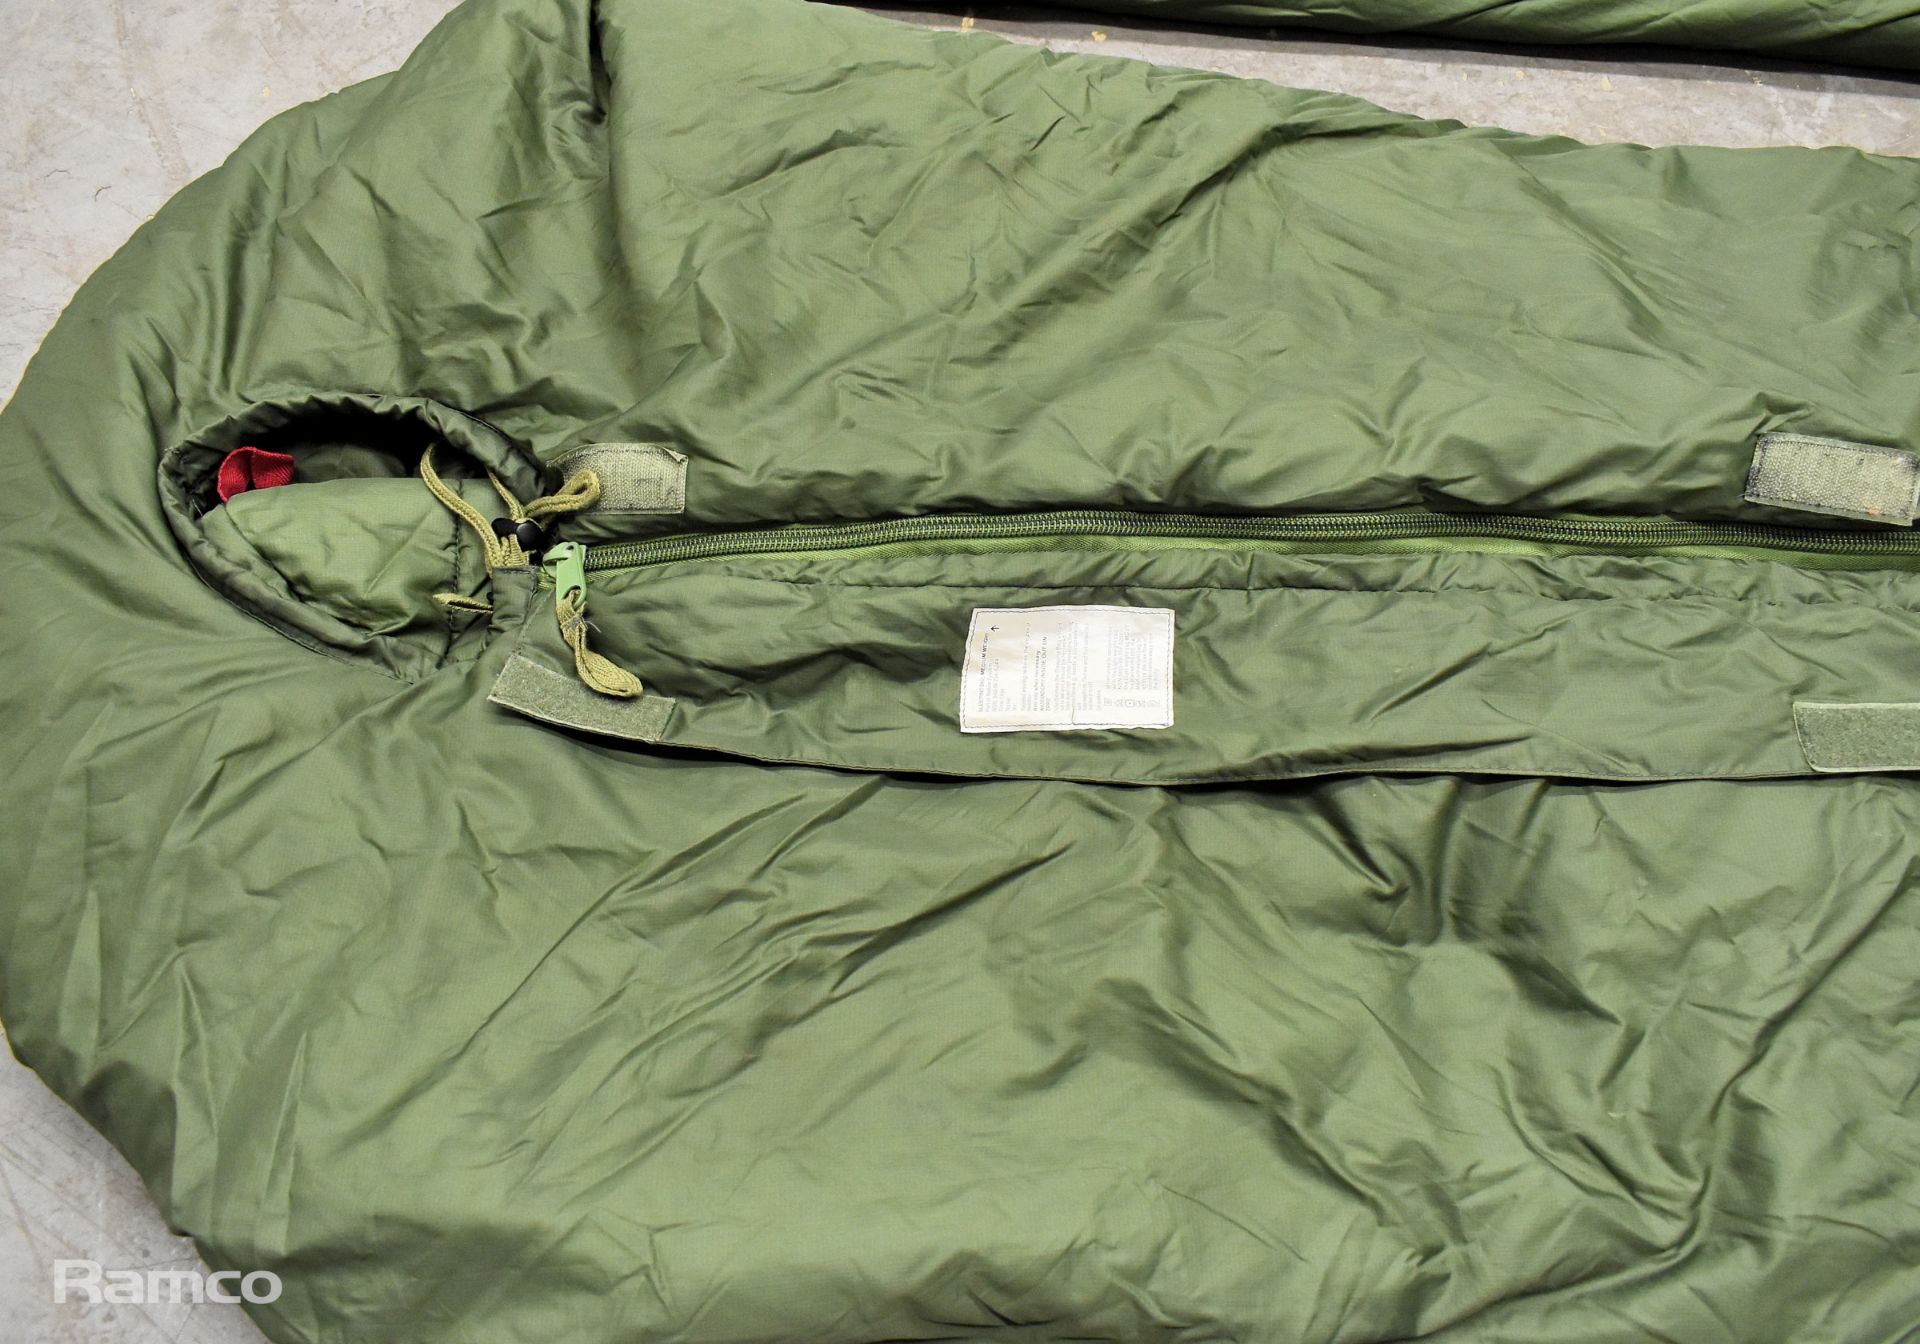 31x Sleeping bags - mixed grades and sizes - Image 6 of 8